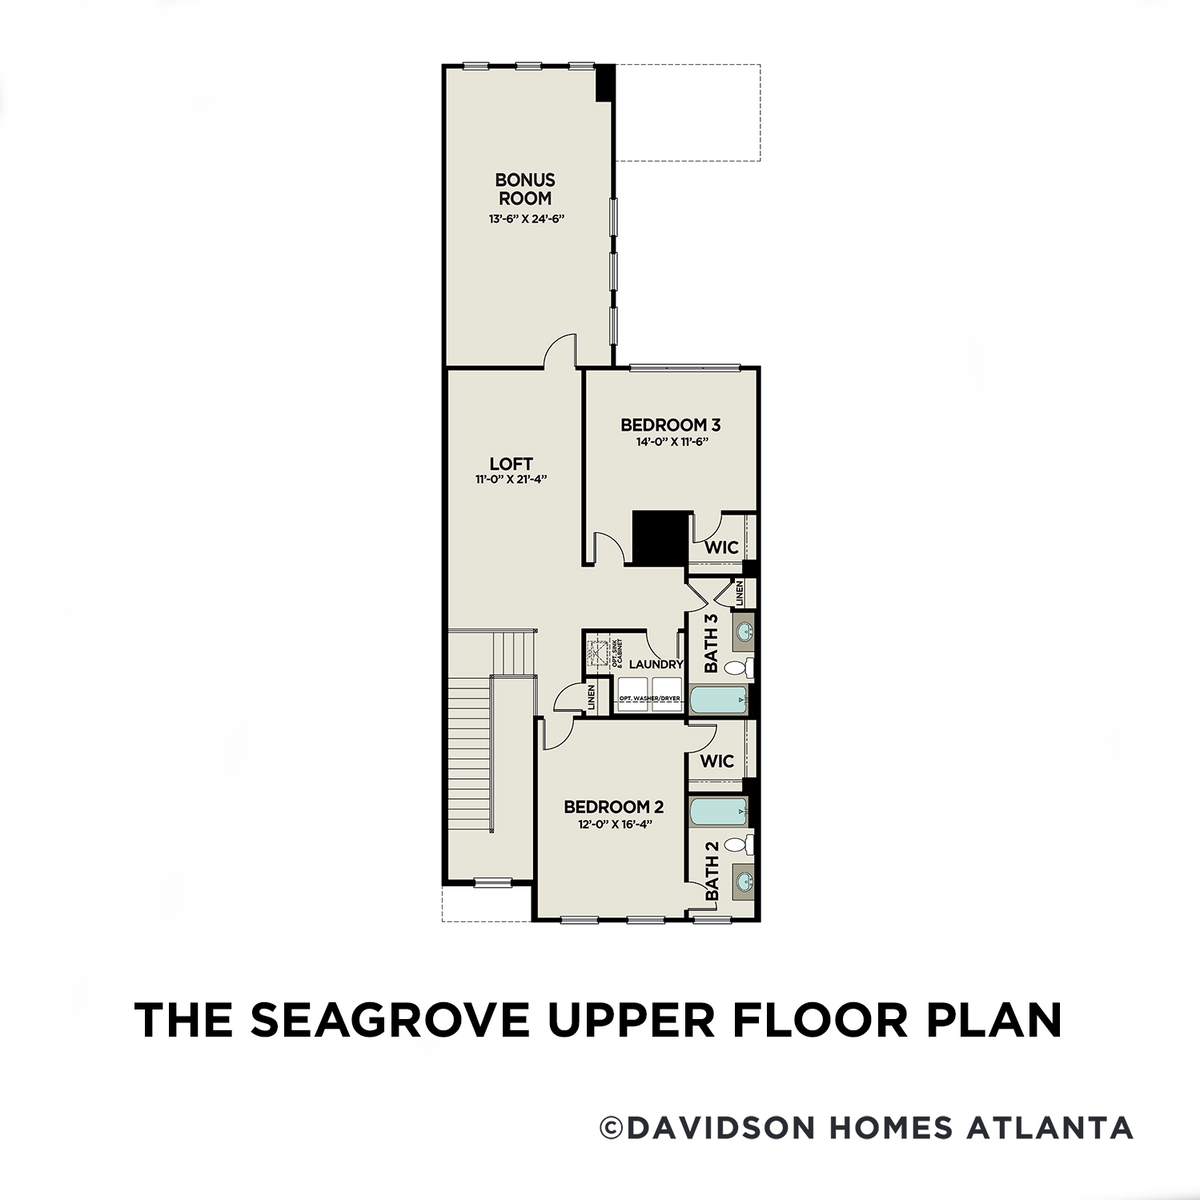 2 - The Seagrove C floor plan layout for 750 Stickley Oak Way in Davidson Homes' The Village at Towne Lake community.